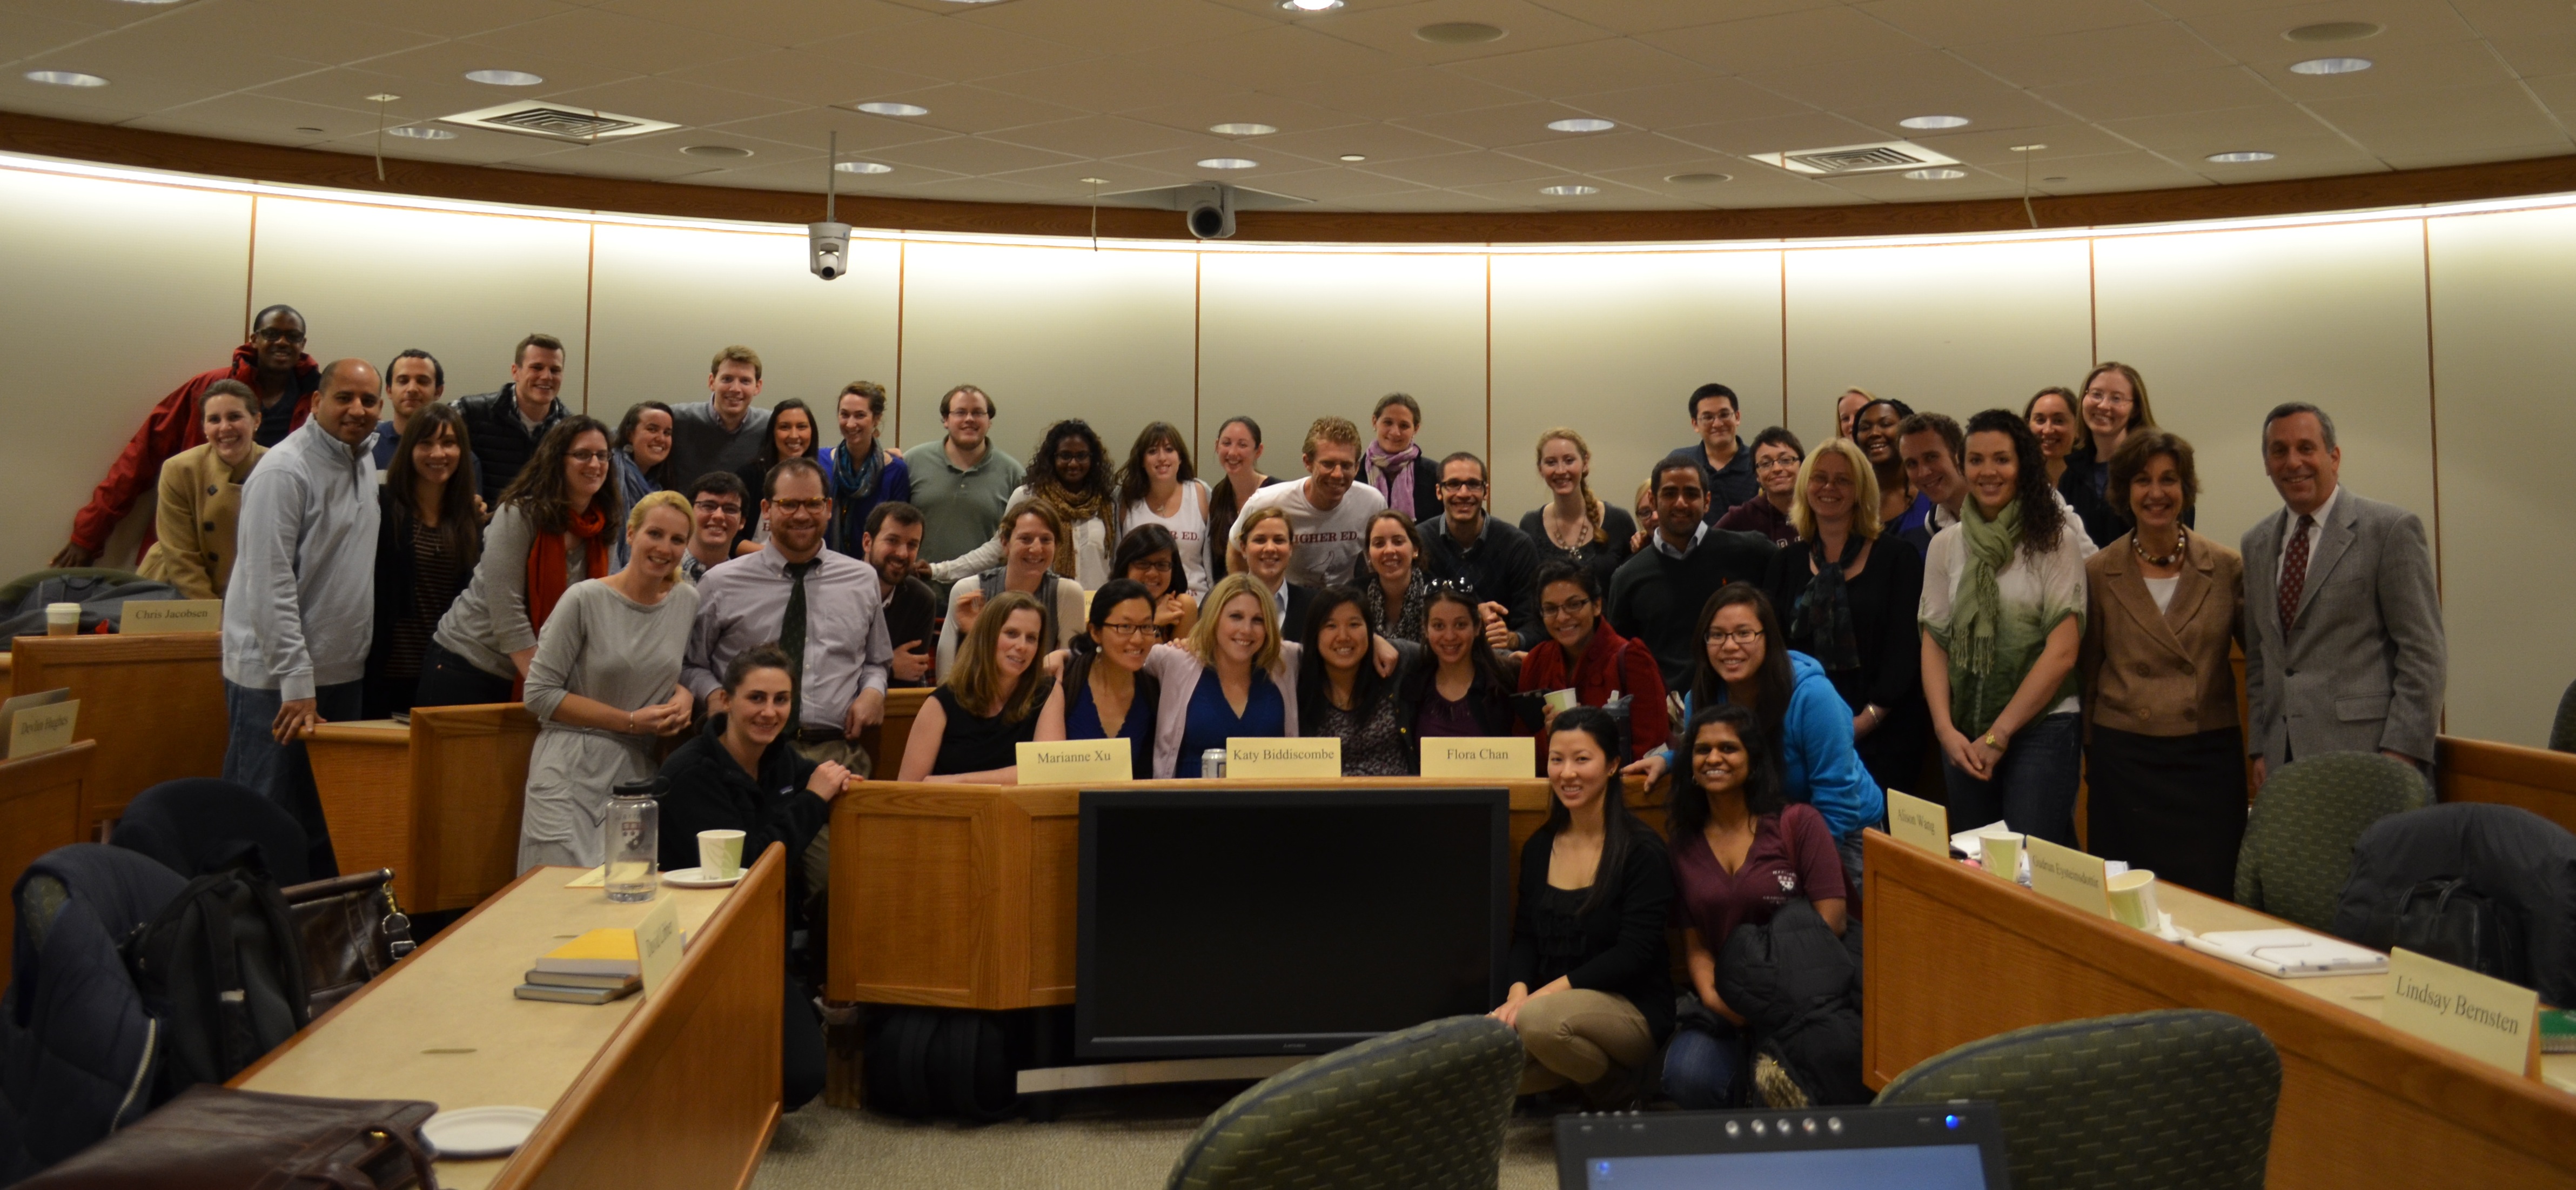 Larry Bacow and the 2013 HGSE Higher Education Program Cohort